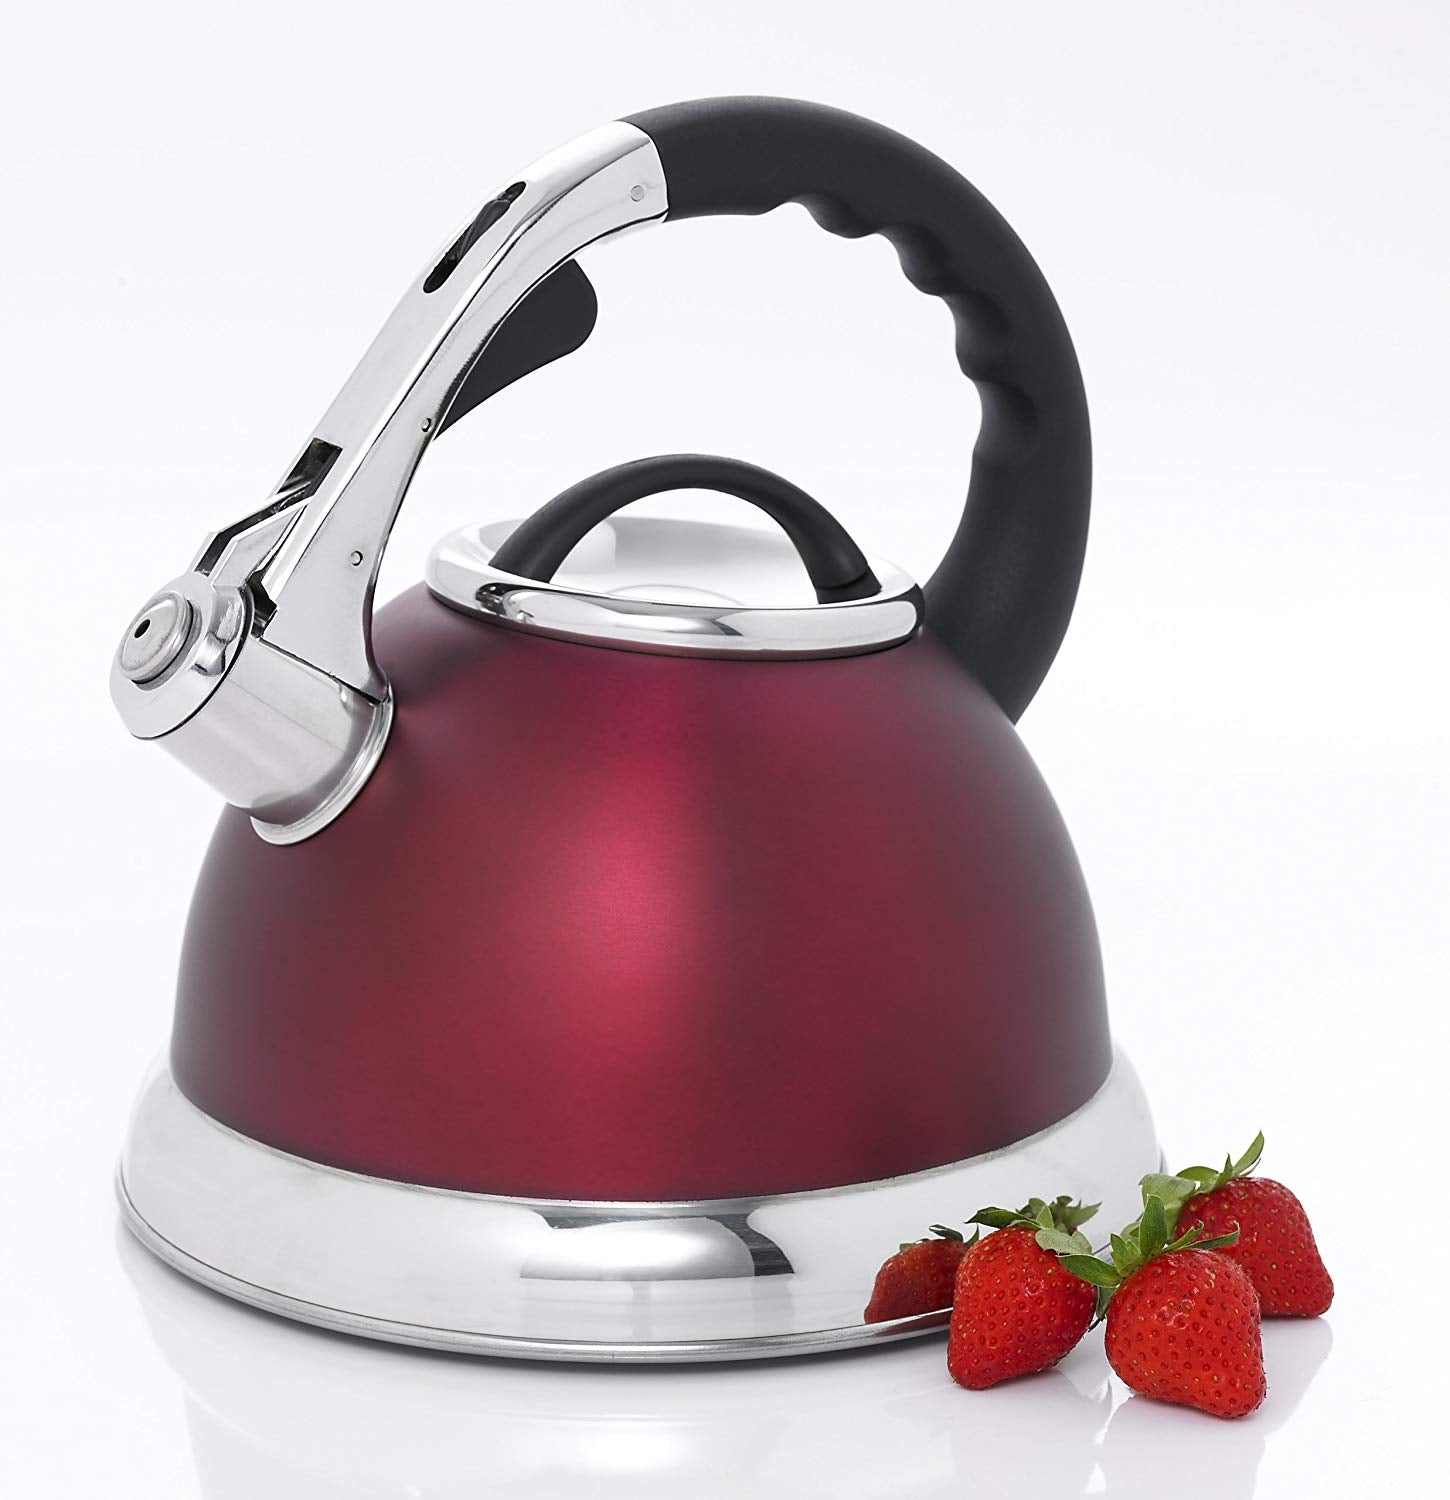 Creative Home Alexa 3 Quarts Stainless Steel Whistling Stovetop Tea Kettle  & Reviews